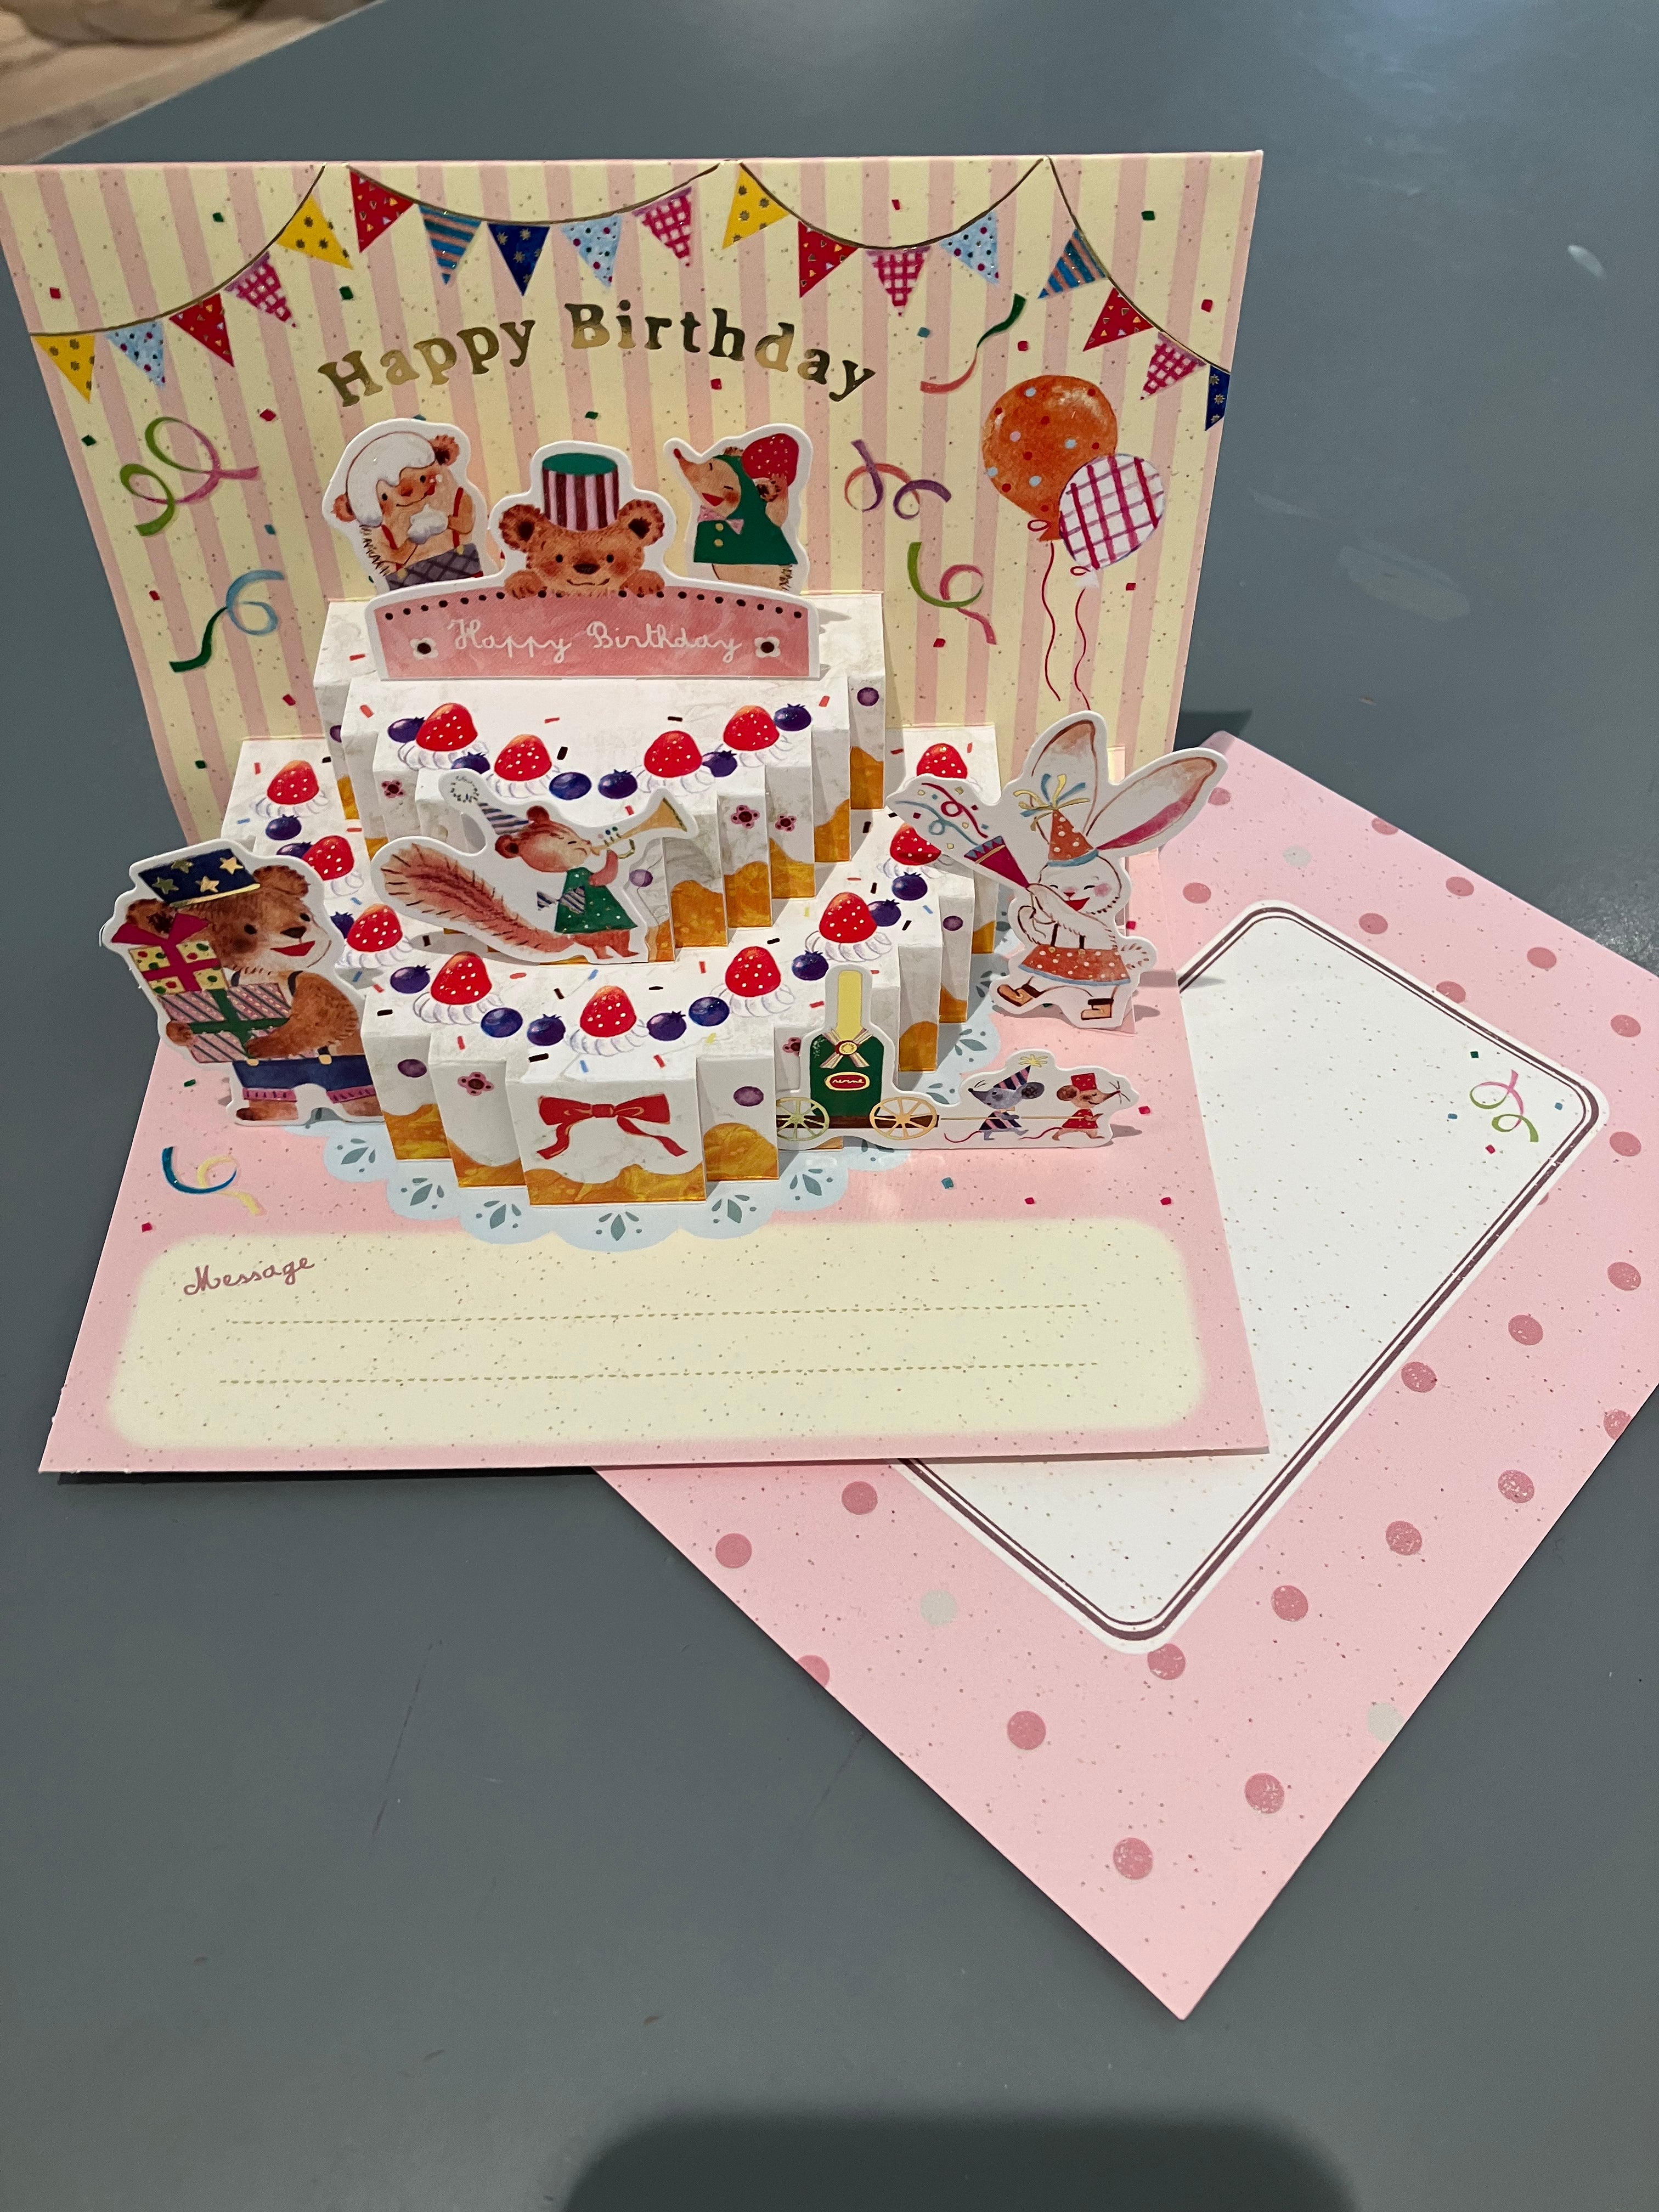 Pop-up birthday card with different animals